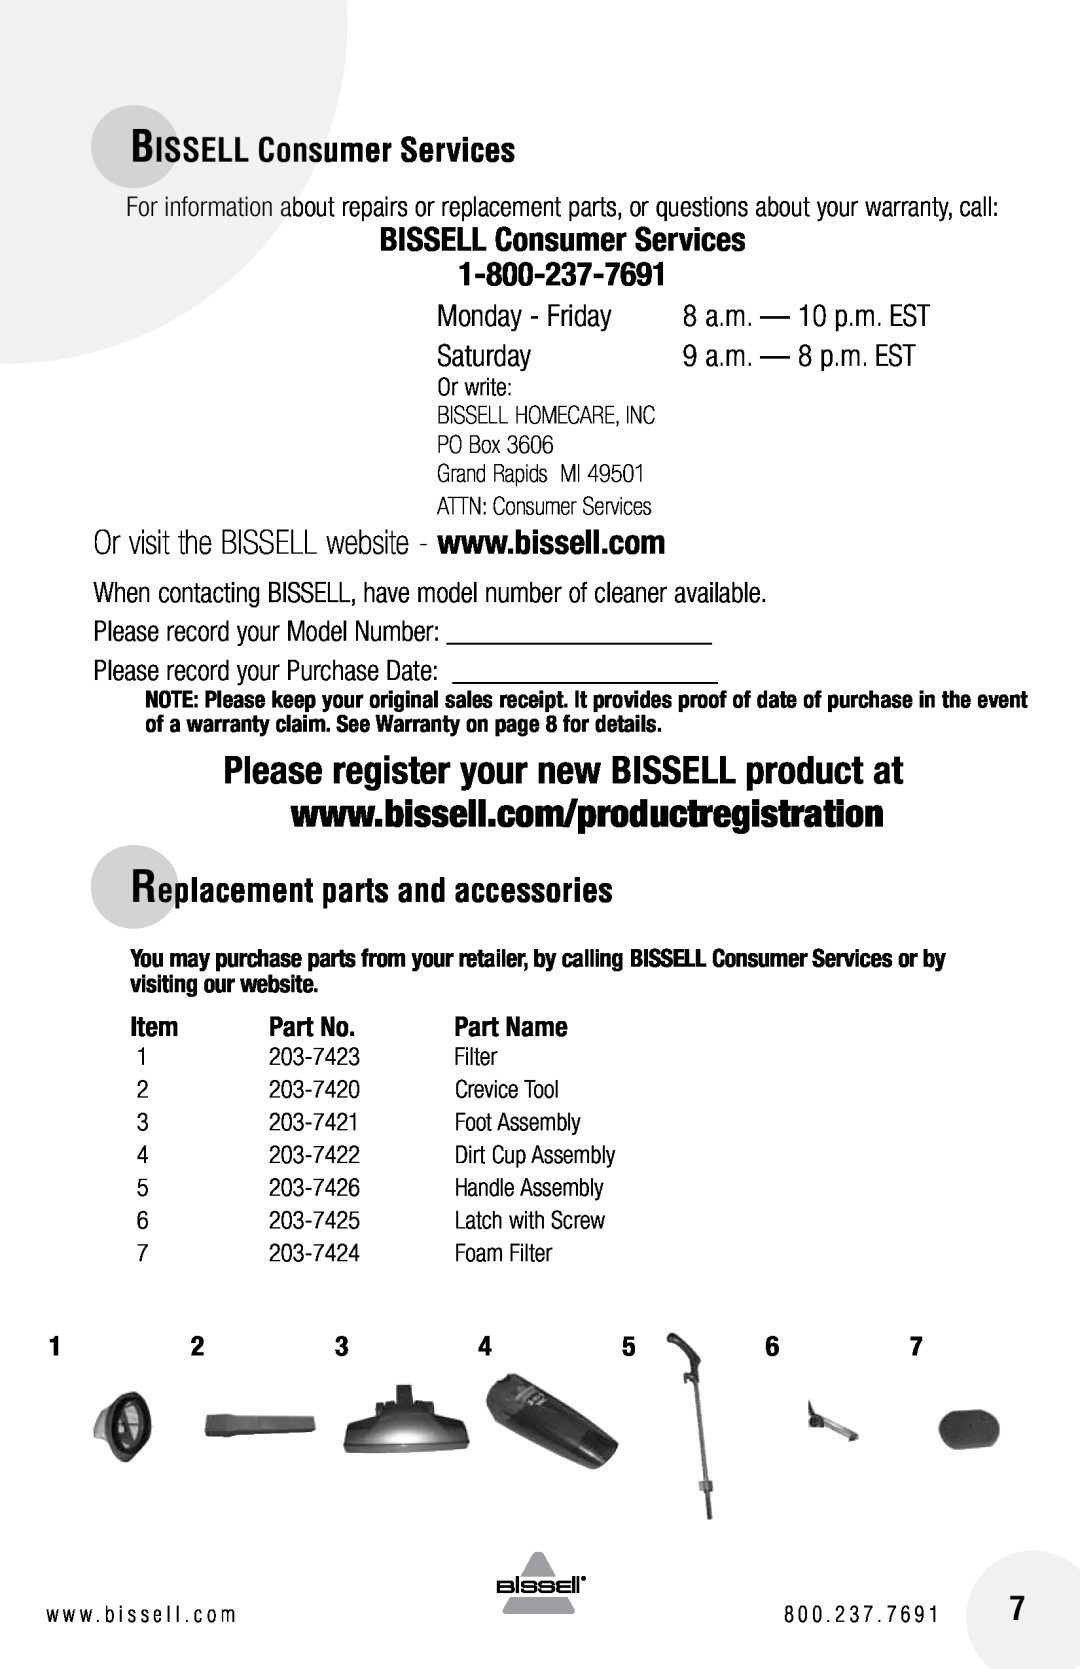 Bissell 38B1 warranty BISSELL Consumer Services, Replacement parts and accessories, Part Name, Monday - Friday, Saturday 